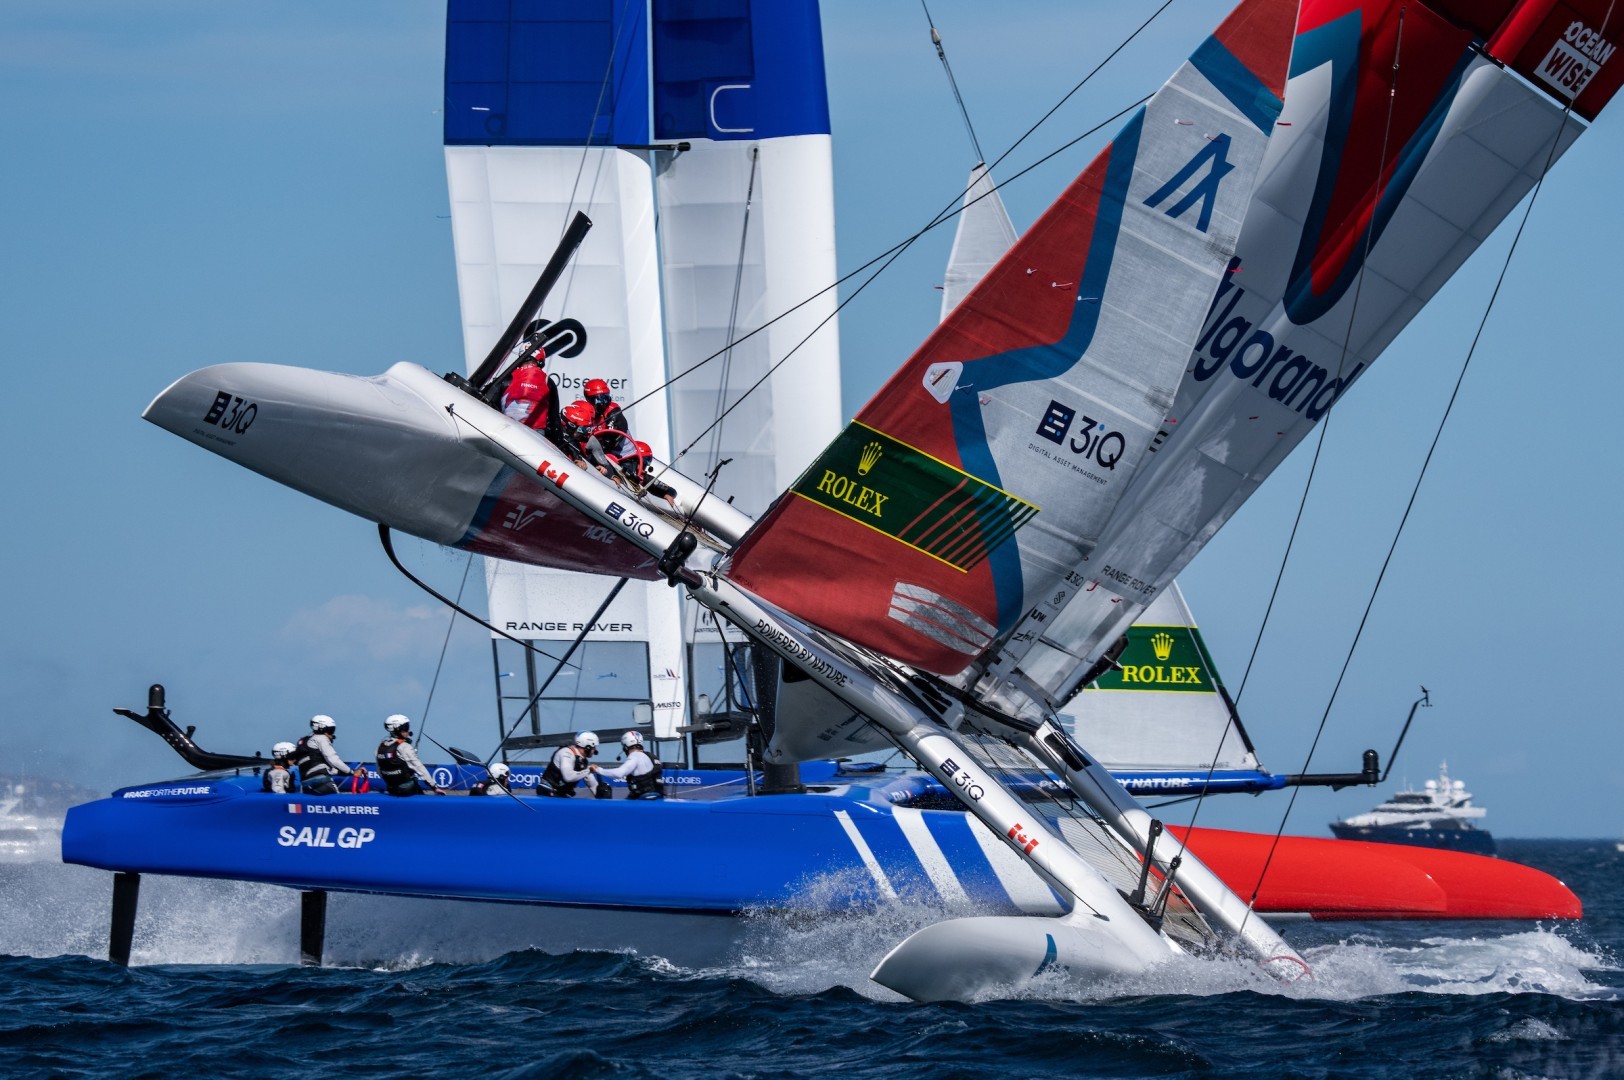 Tensions running high on SailGP's fastest day ever